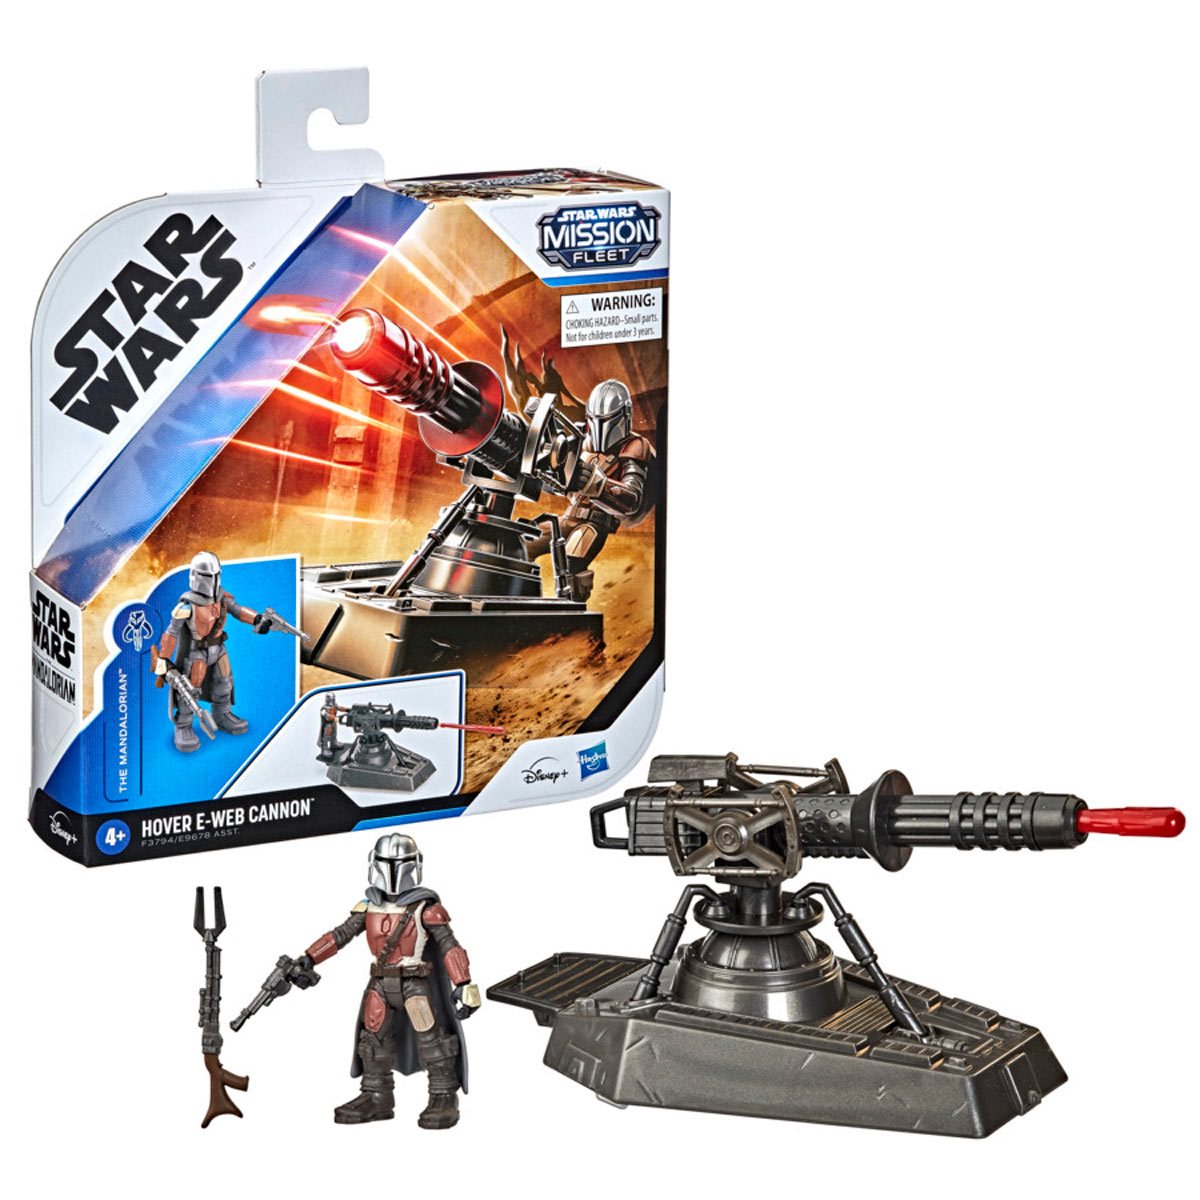 Mission Fleet Expedition Class The Mandalorian Action Figure for sale online Star Wars 